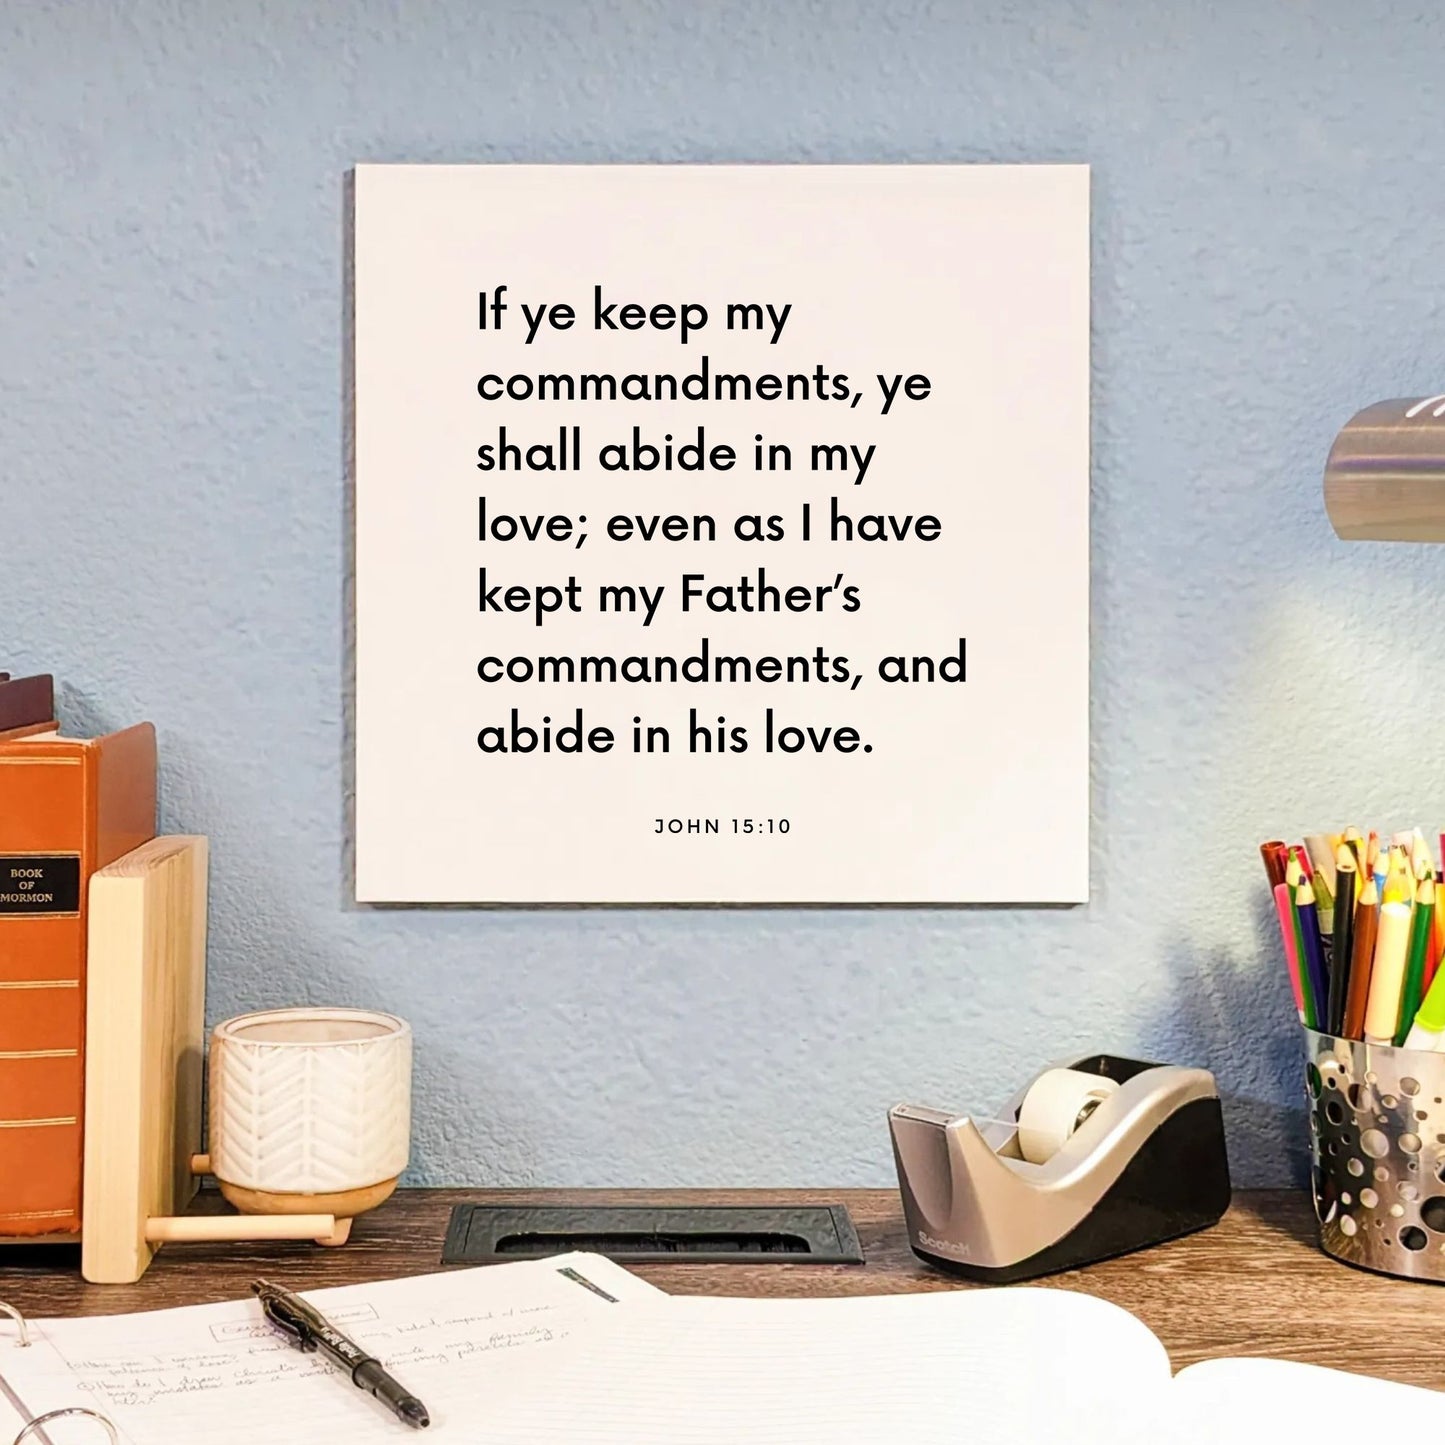 Desk mouting of the scripture tile for John 15:10 - "If ye keep my commandments, ye shall abide in my love"